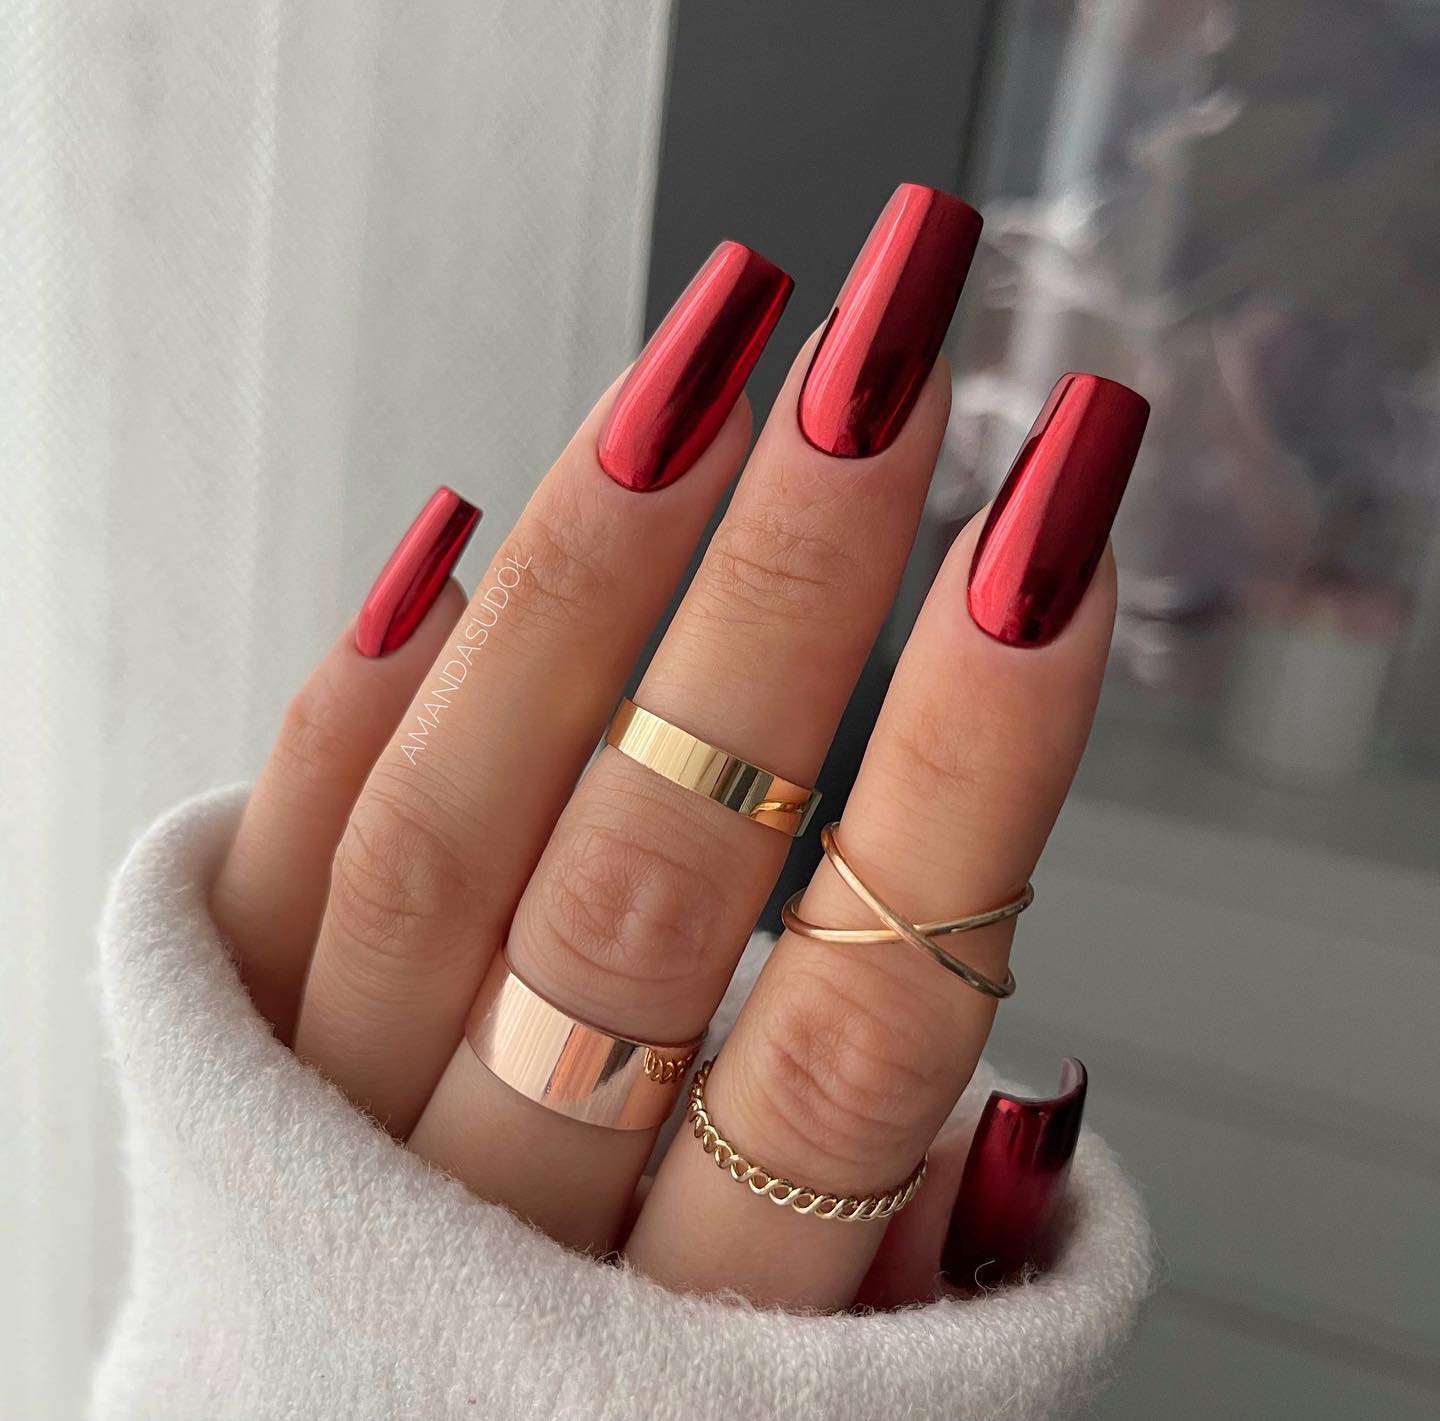 Long Square Chrome Dark Red Nails